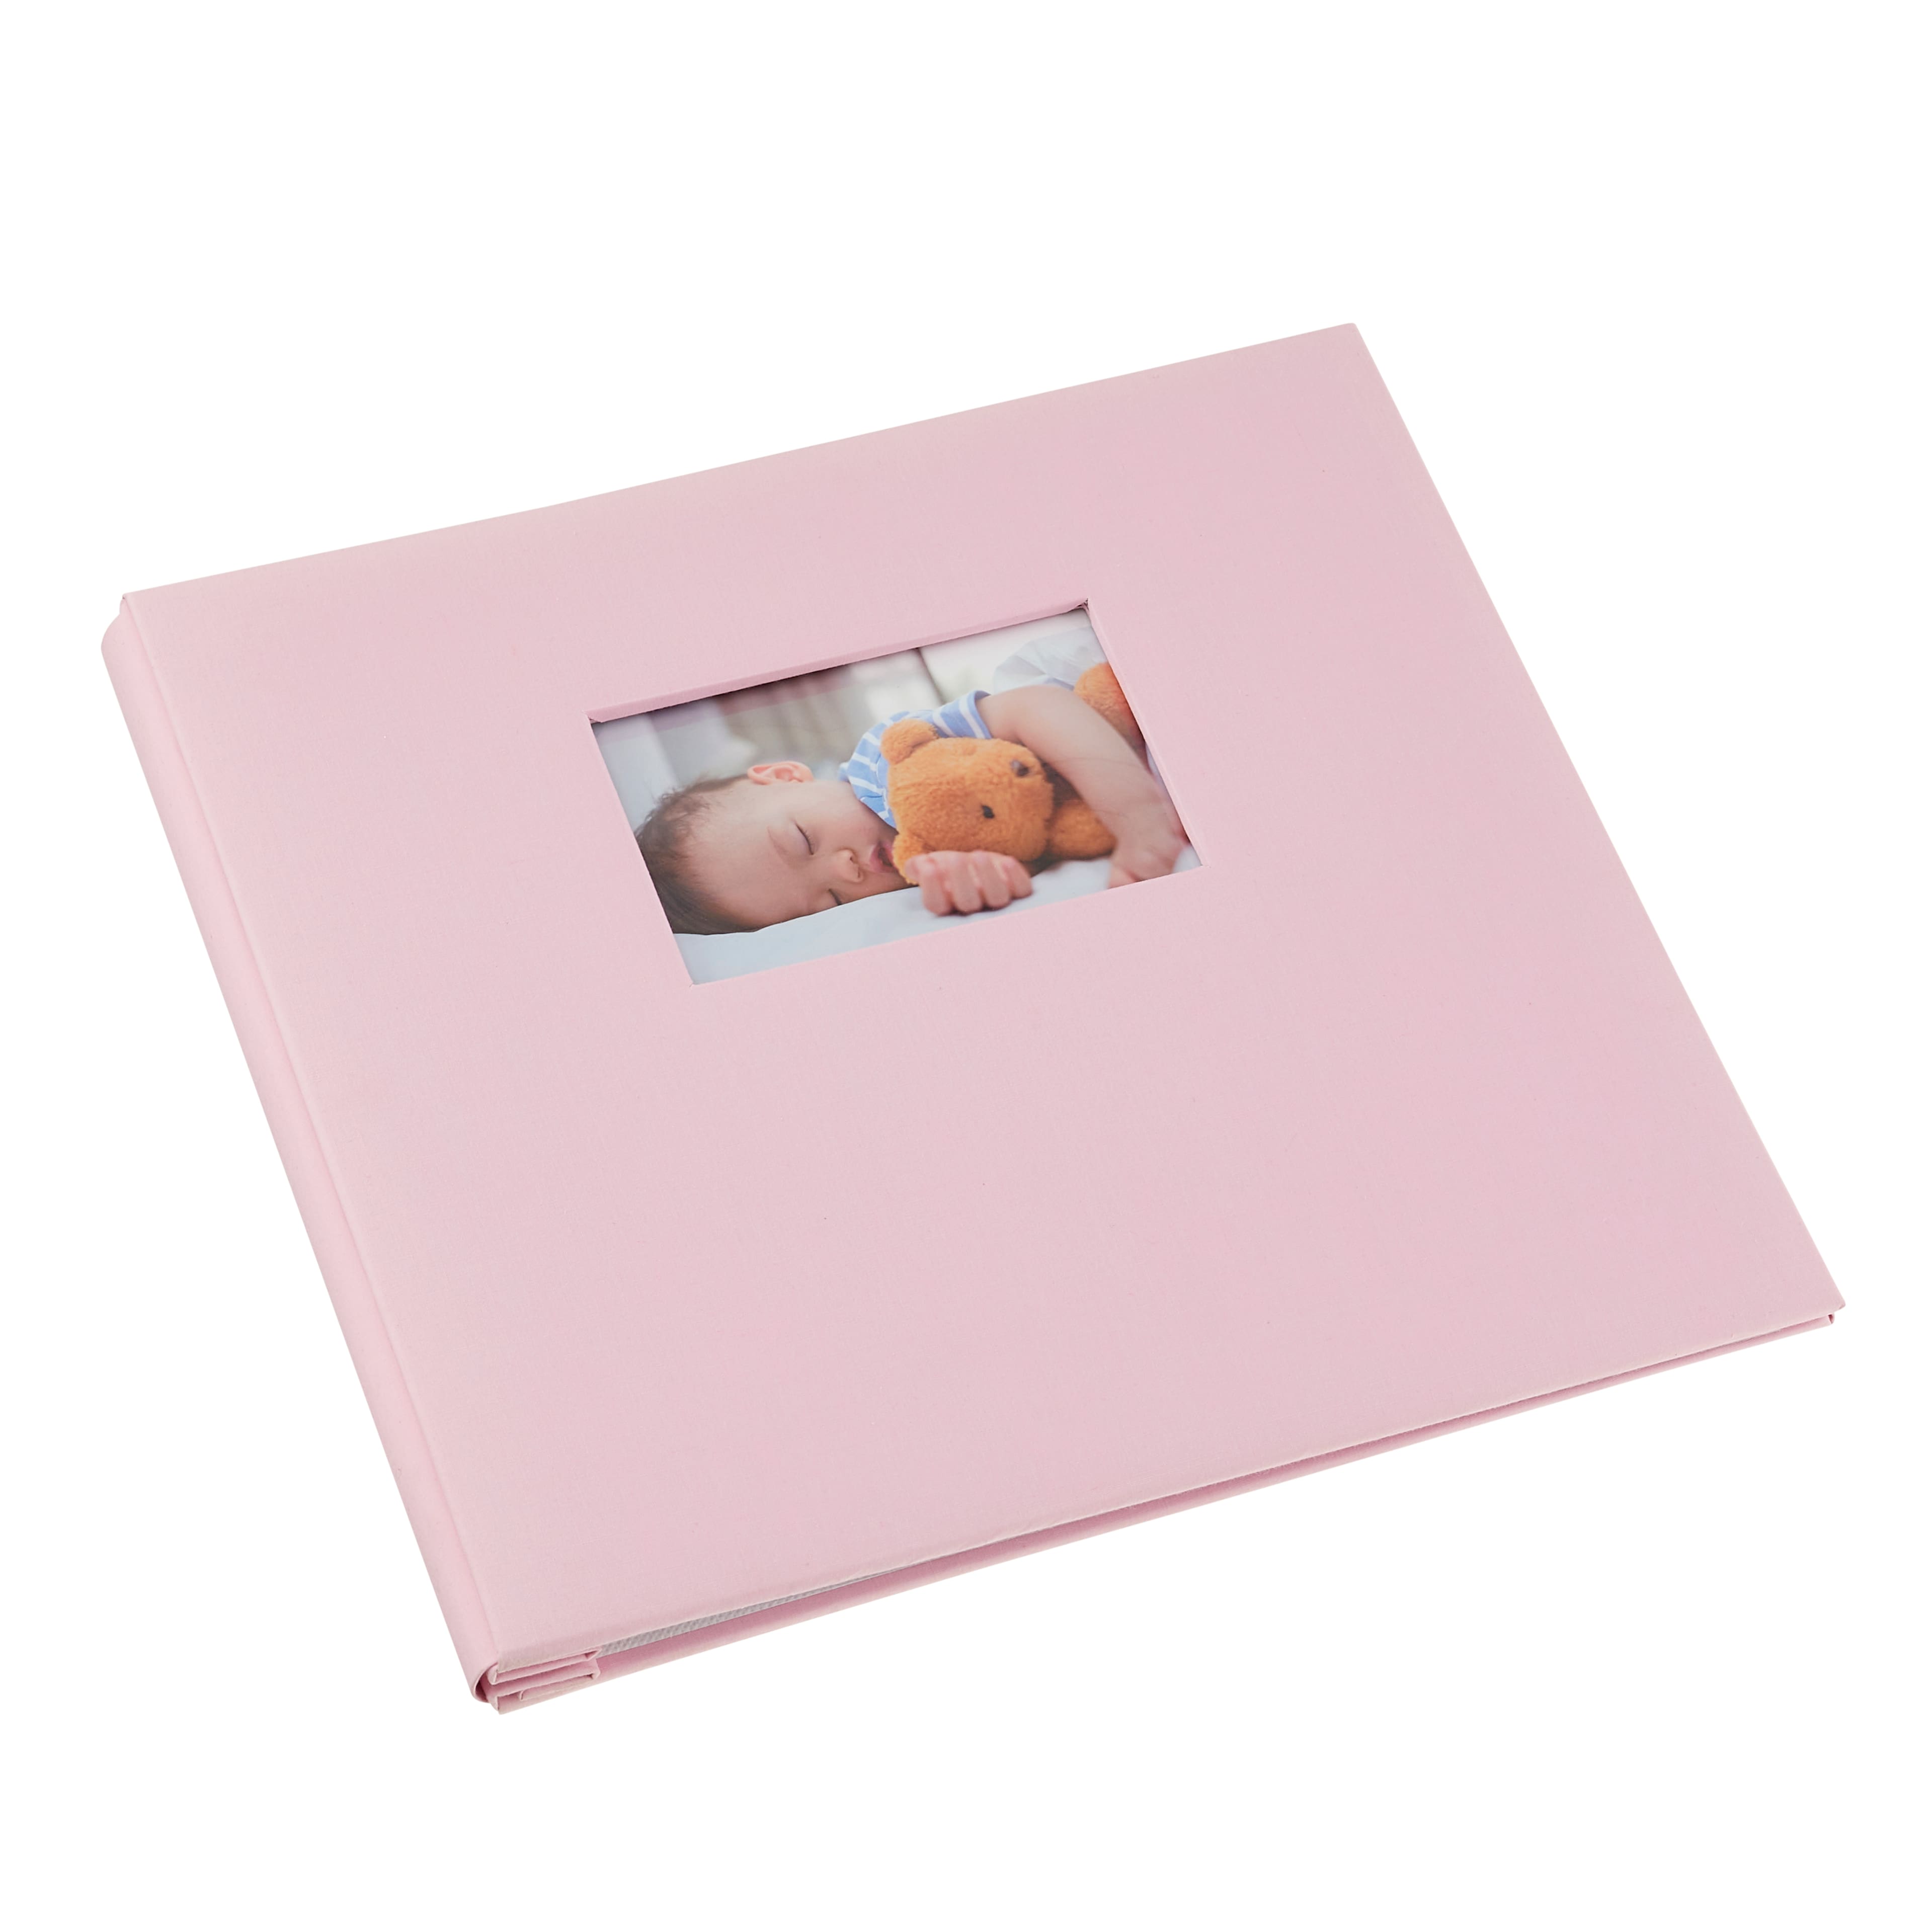 Shop for the Pink Mega Scrapbook Album by Recollections® at Michaels